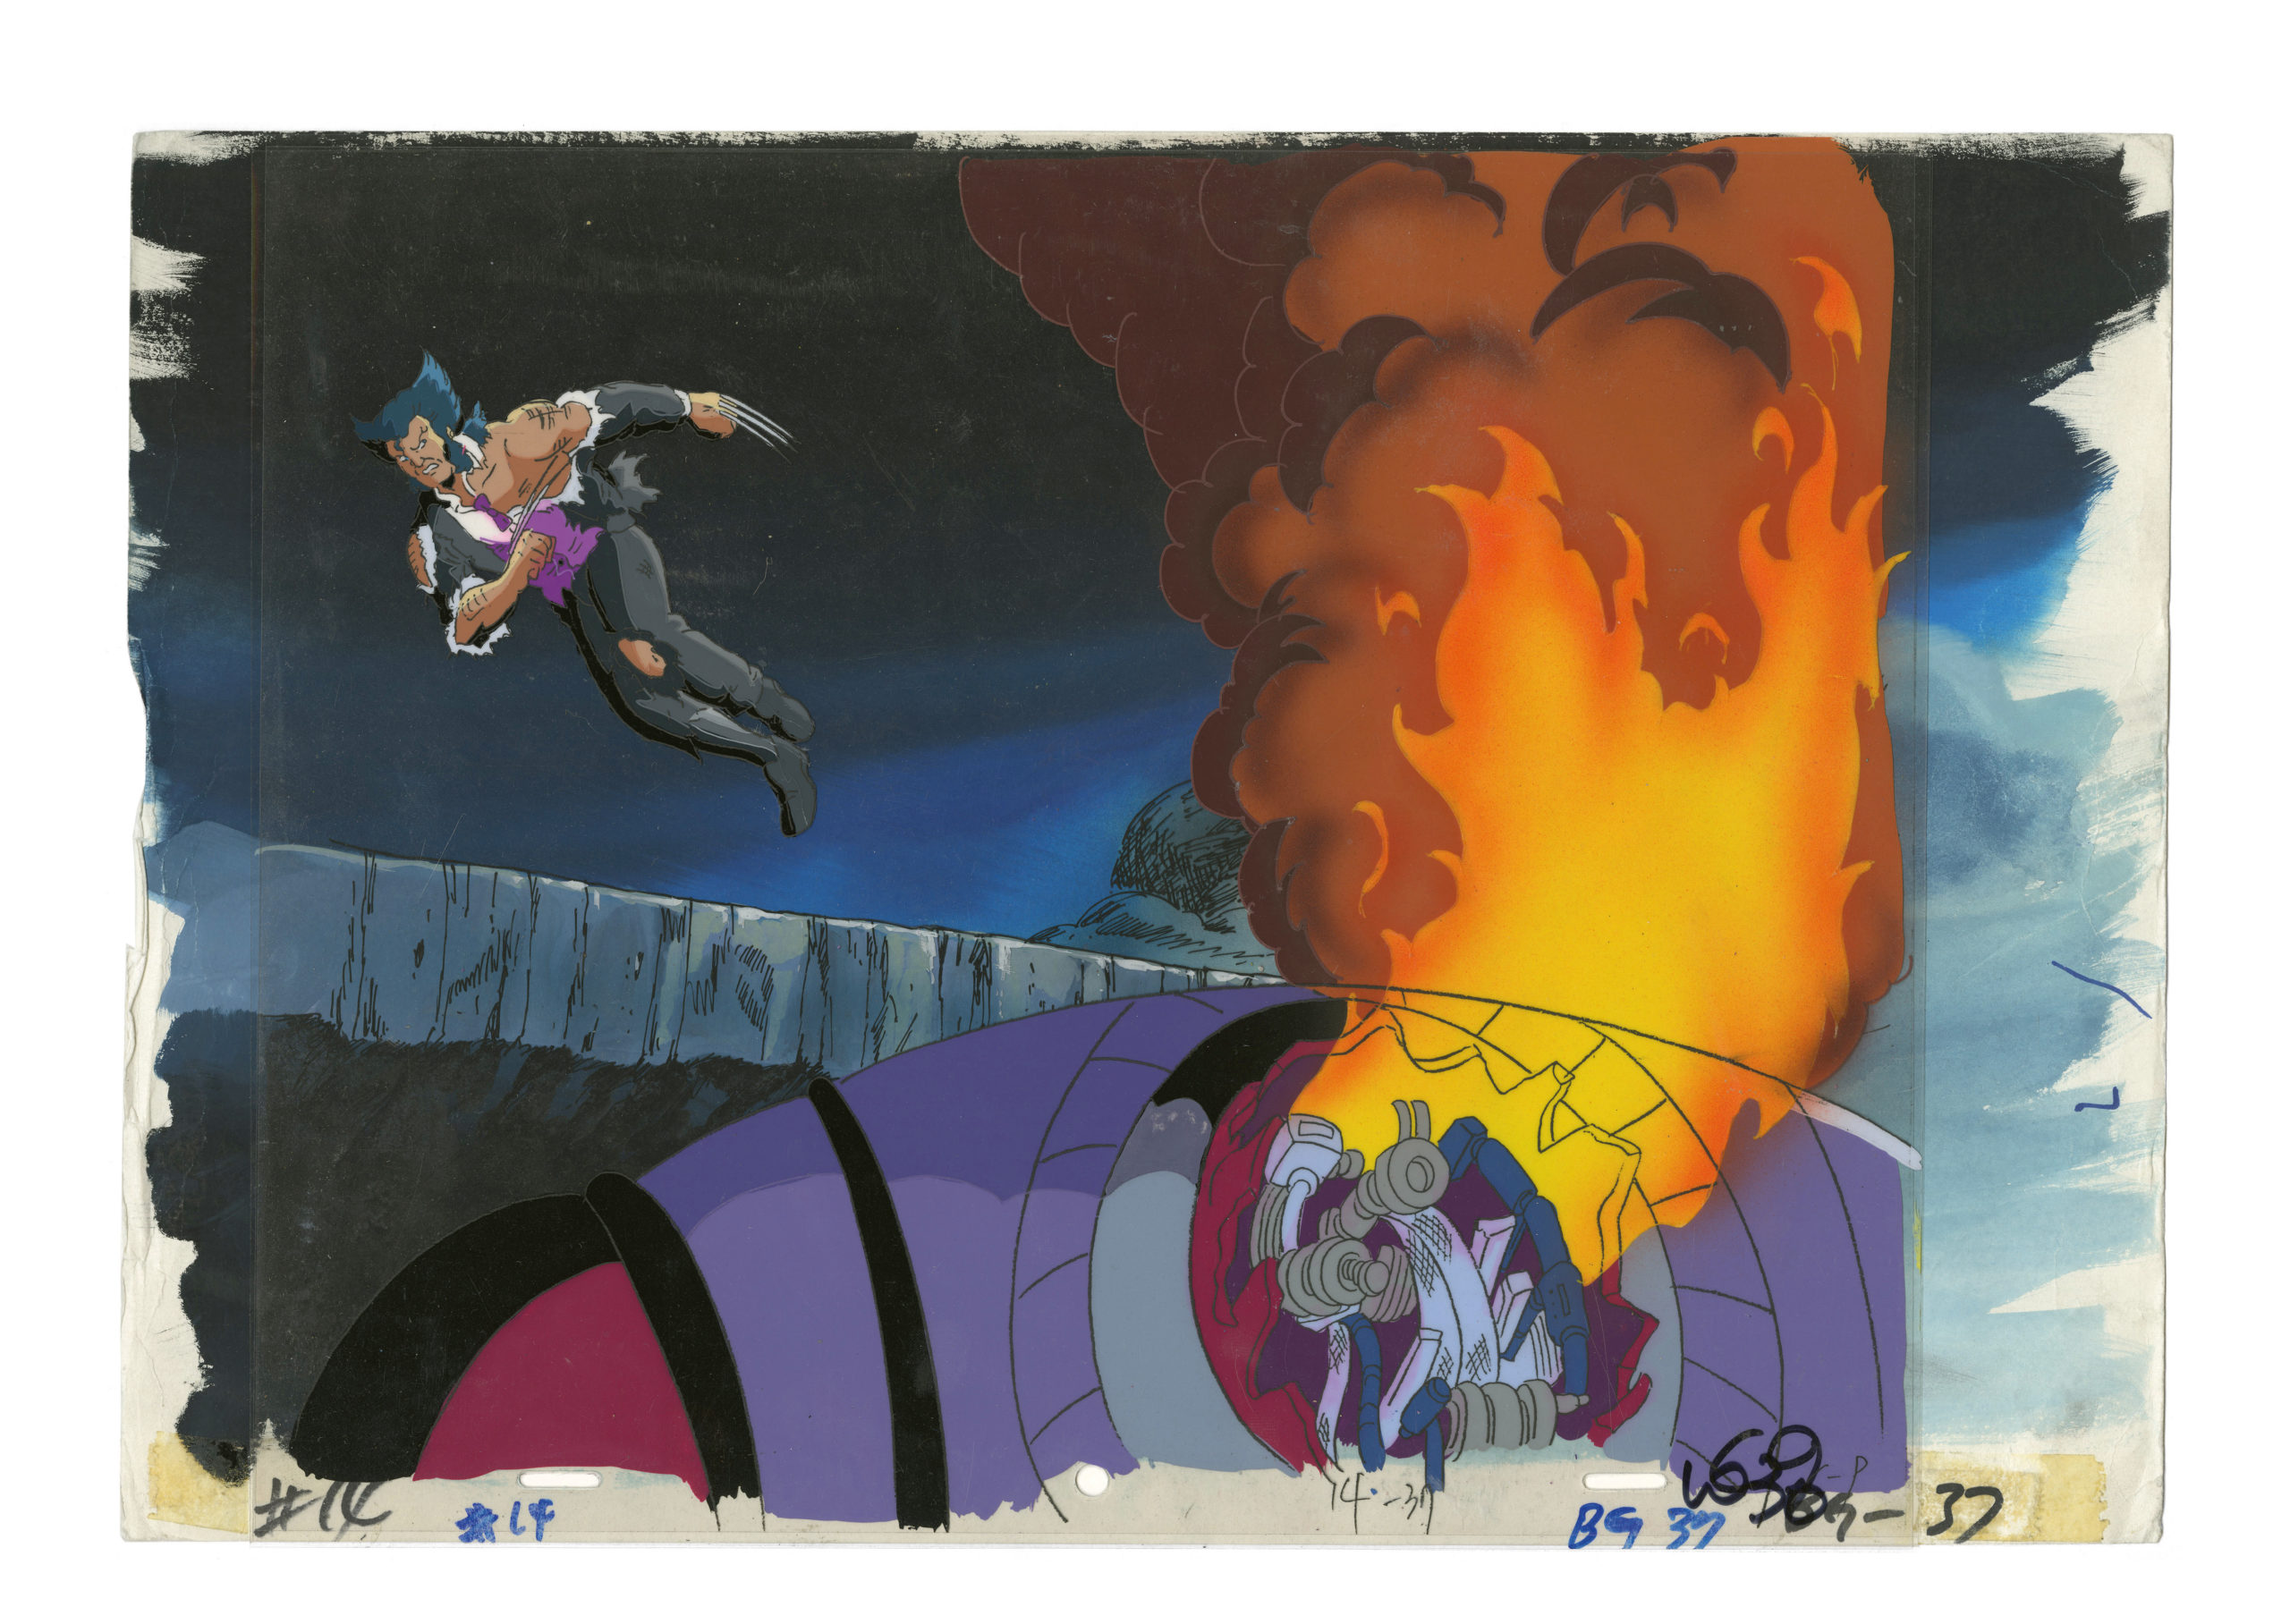 Production cel of Wolverine, in the Danger Room, ferociously destroying a Sentinel robot that looked like Cyclops — who at that moment is marrying Jean Grey. Wolverine is formally dressed to go to the wedding, but his despair at losing Jean to Scott keeps him away. (Image: Abrams)